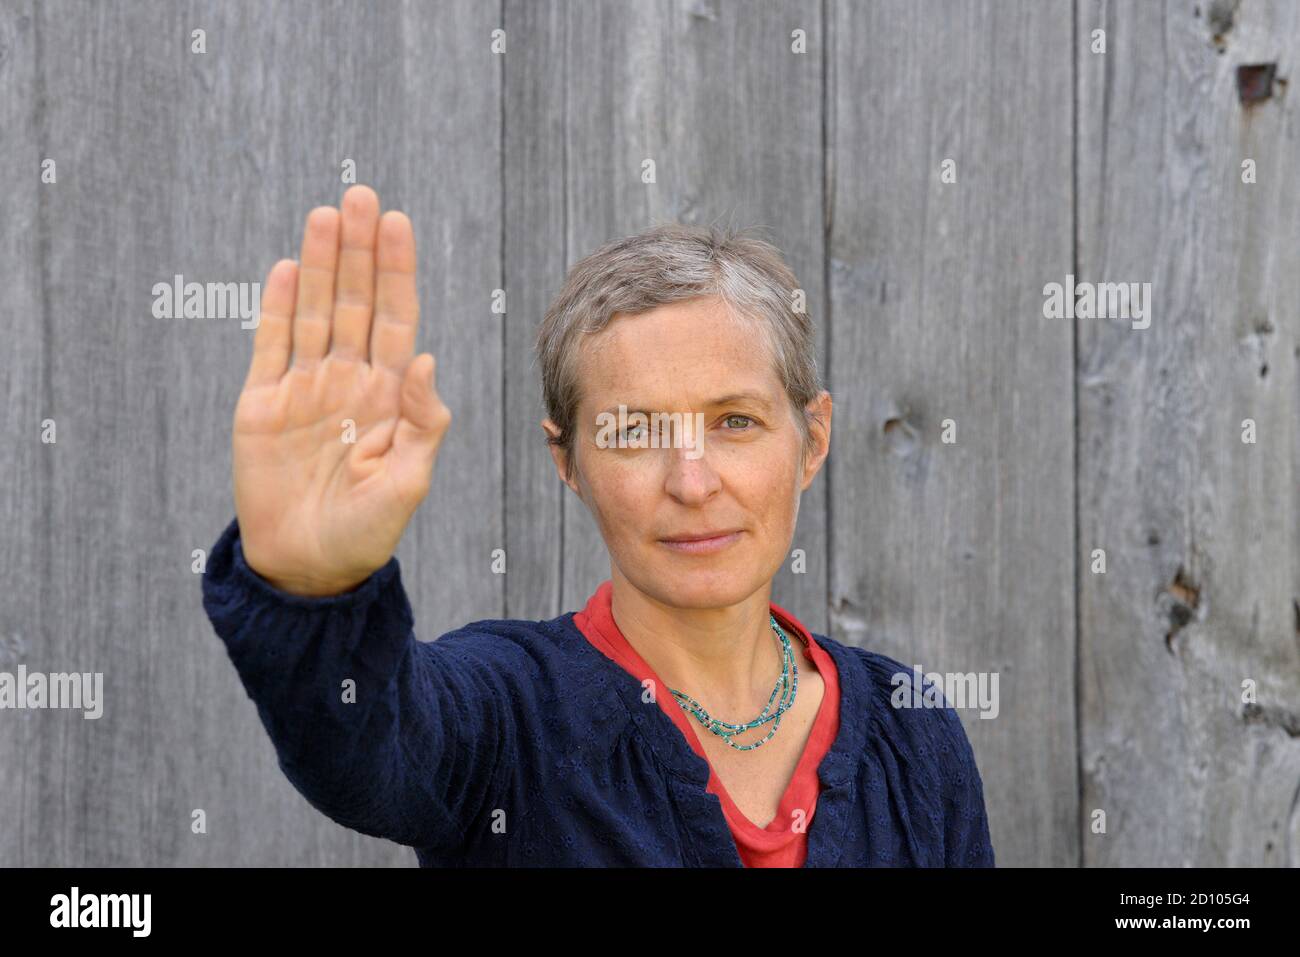 Angry middle-aged Caucasian country woman with short hair makes the hand palm stop sign with her right hand, in front of an old barn wood background. Stock Photo